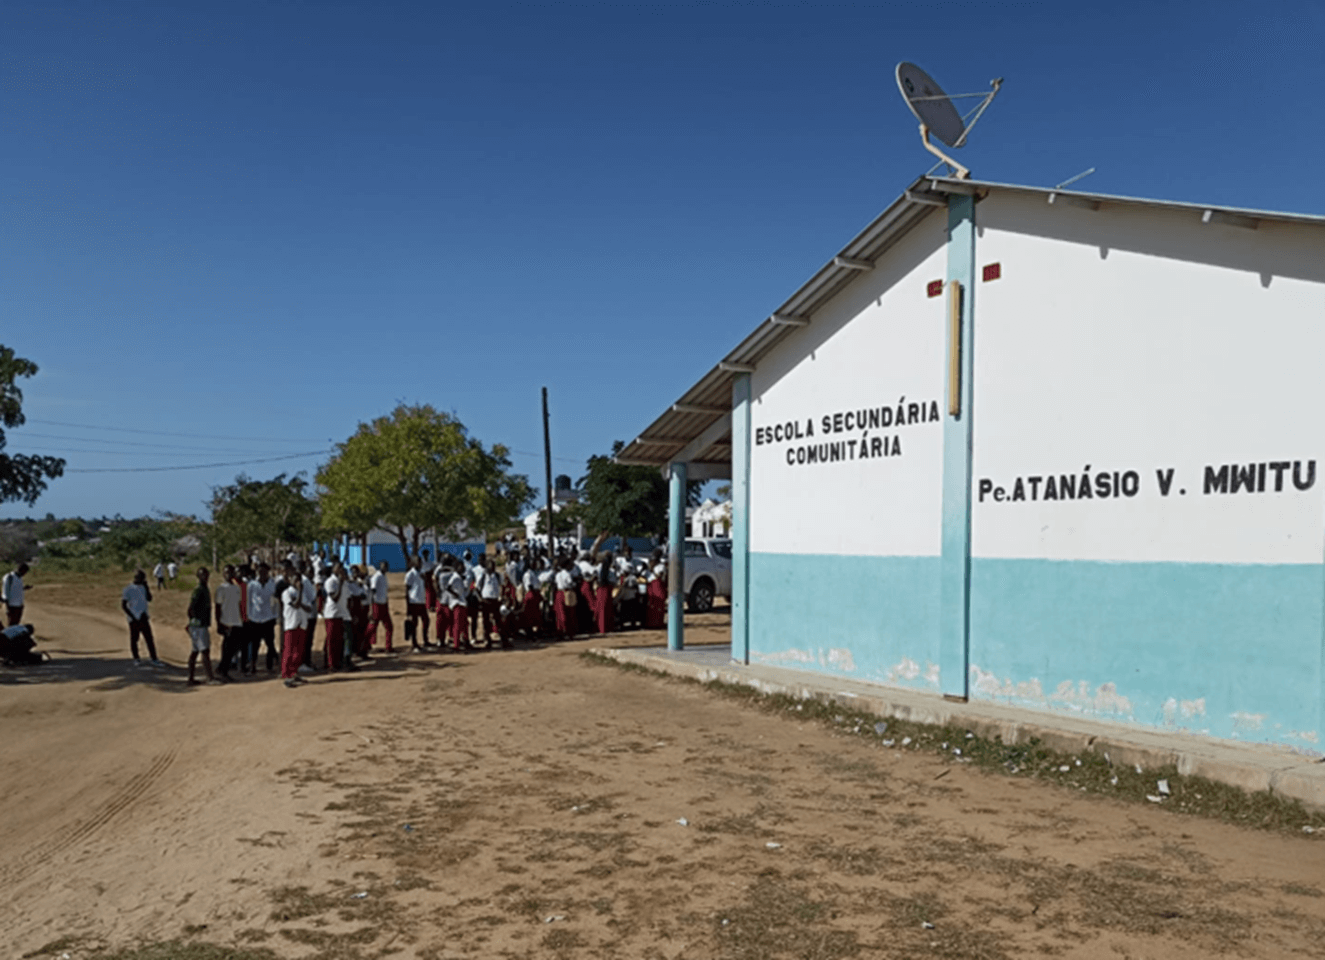 This photo captures a moment at the “Escola Secundária Comunitária Pe. Atanásio V. Minitu” in Mozambique. A group of students in red and white uniforms are gathered outside the white and blue trimmed school building, which has a satellite dish on its roof. The sky is blue and trees can be seen in the background, while the ground is dirt and a dirt road runs in front of the building. This image portrays a vibrant school community in a rural setting.